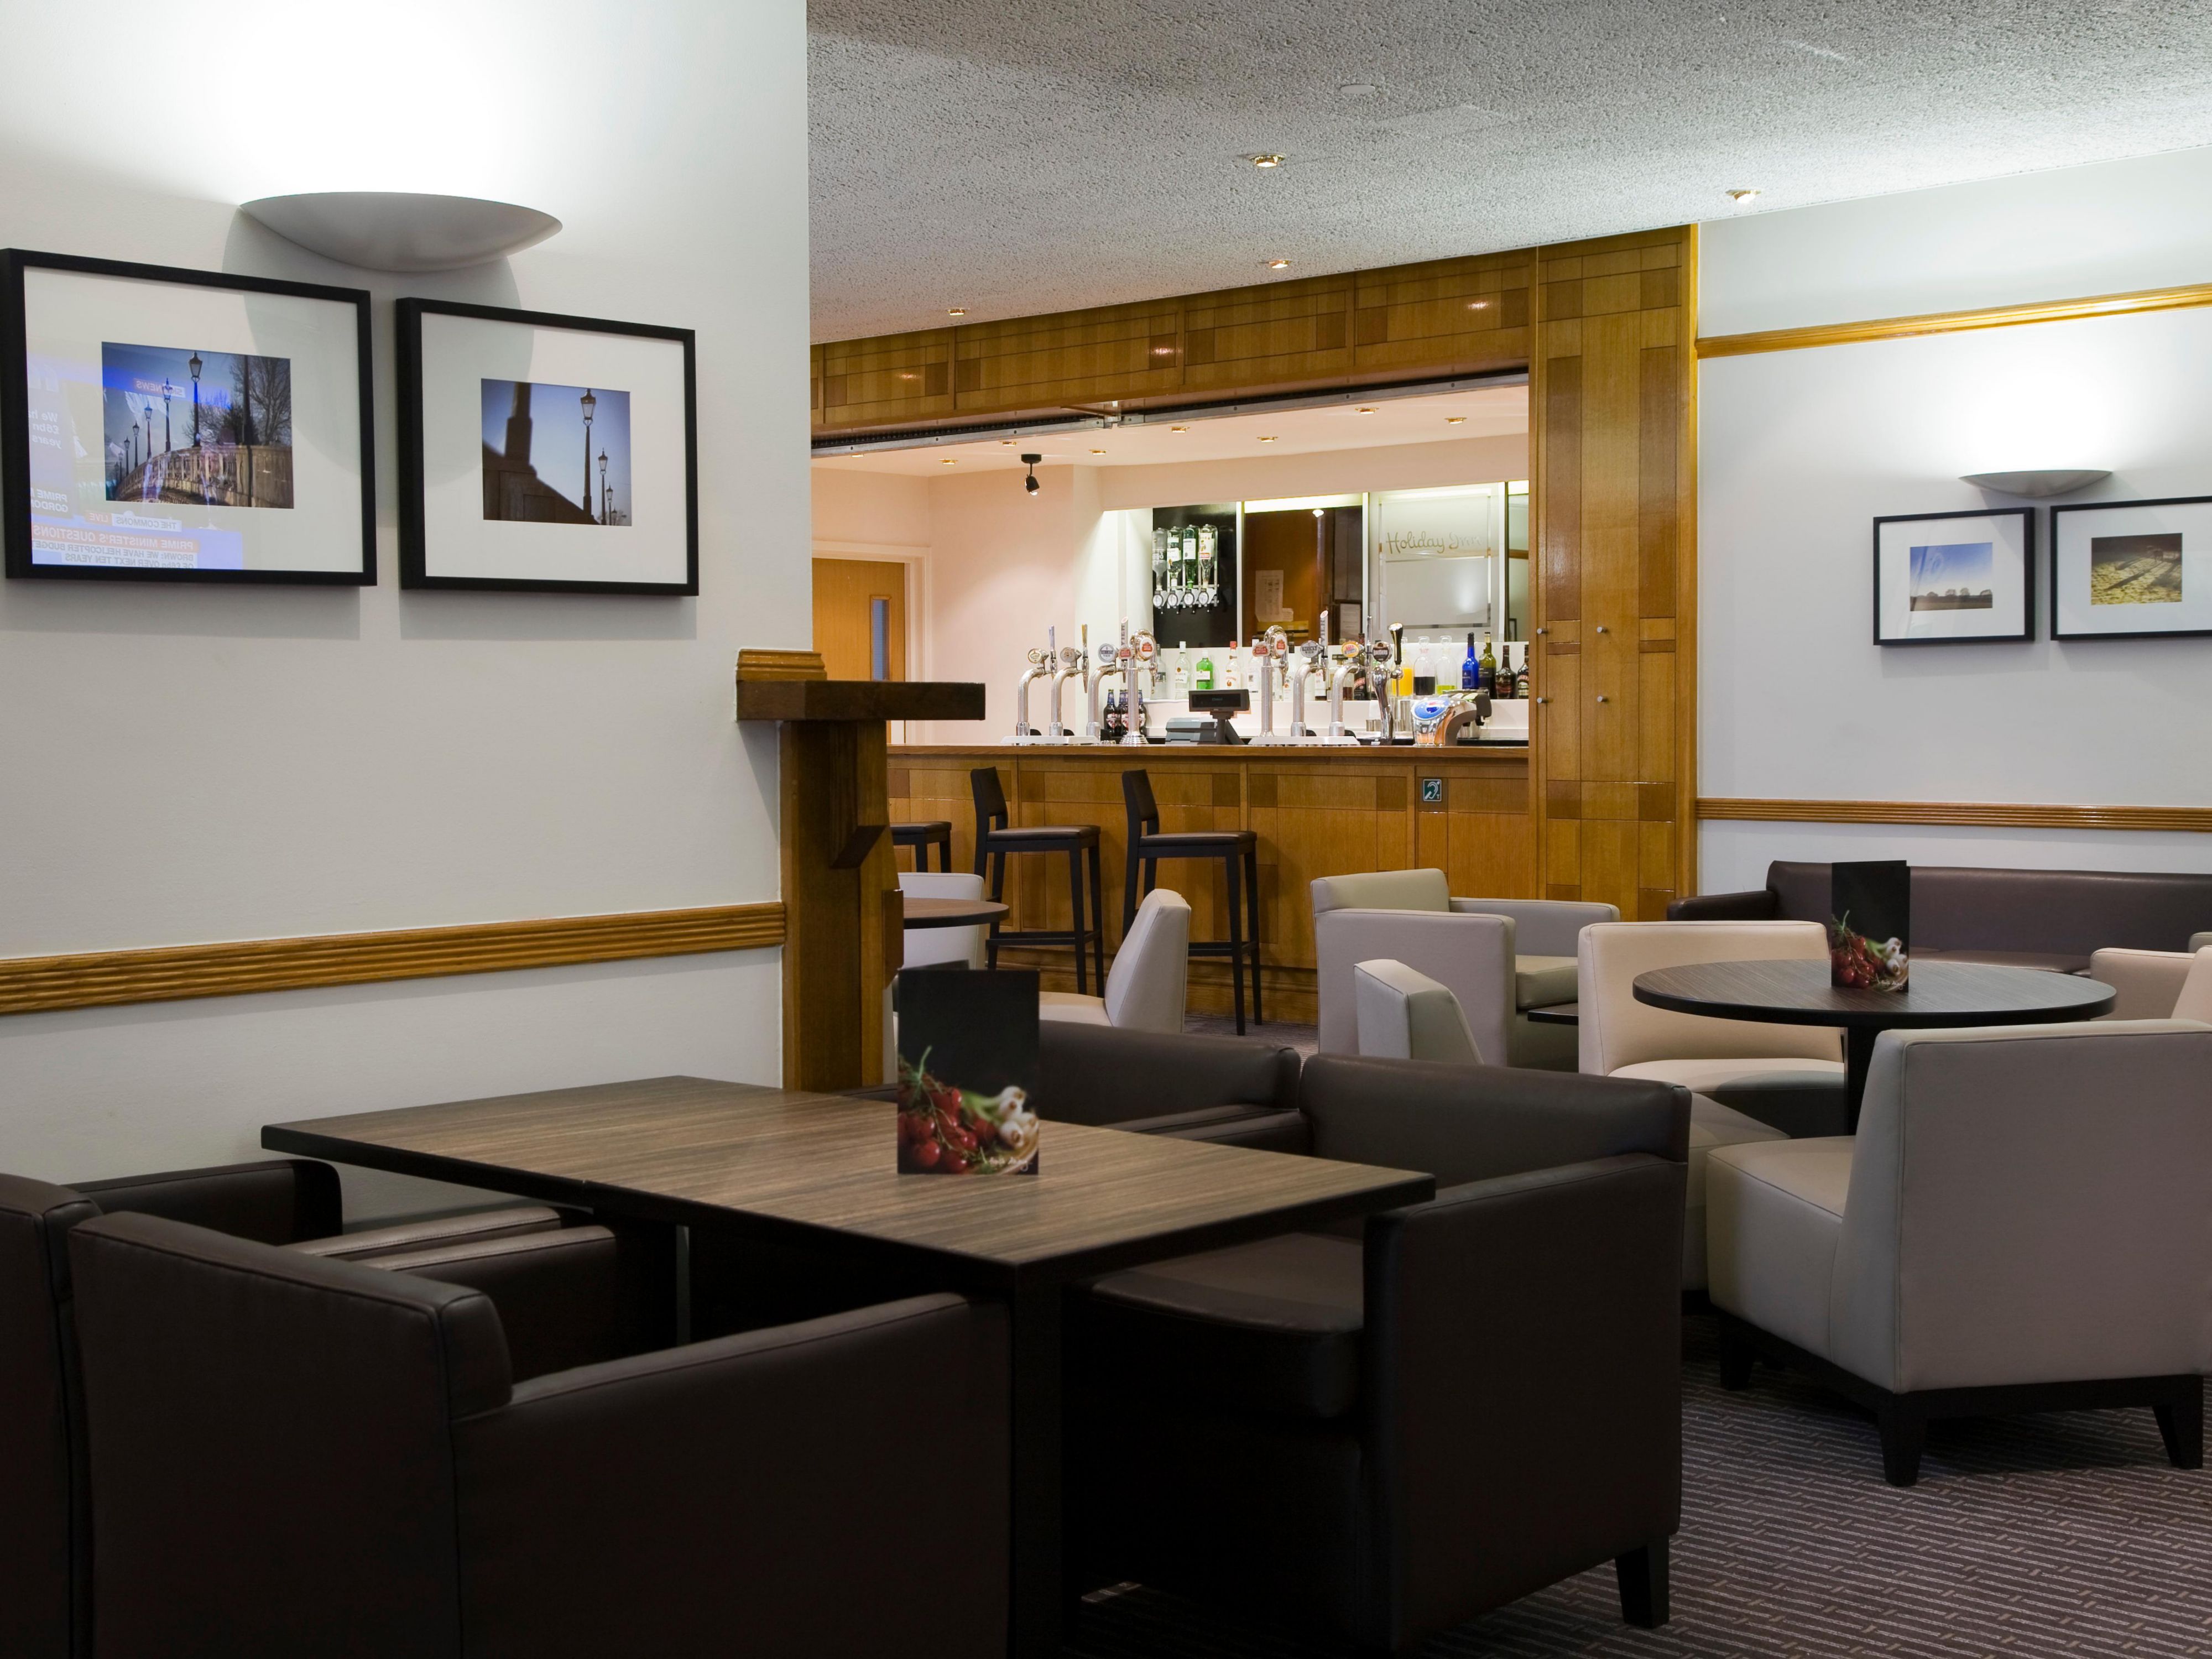 Our hotel has a range of food and drink options for our guests to enjoy. Our lounge and bar areas are open throughout the day and offer a relaxing place to grab a drink or a light bite.